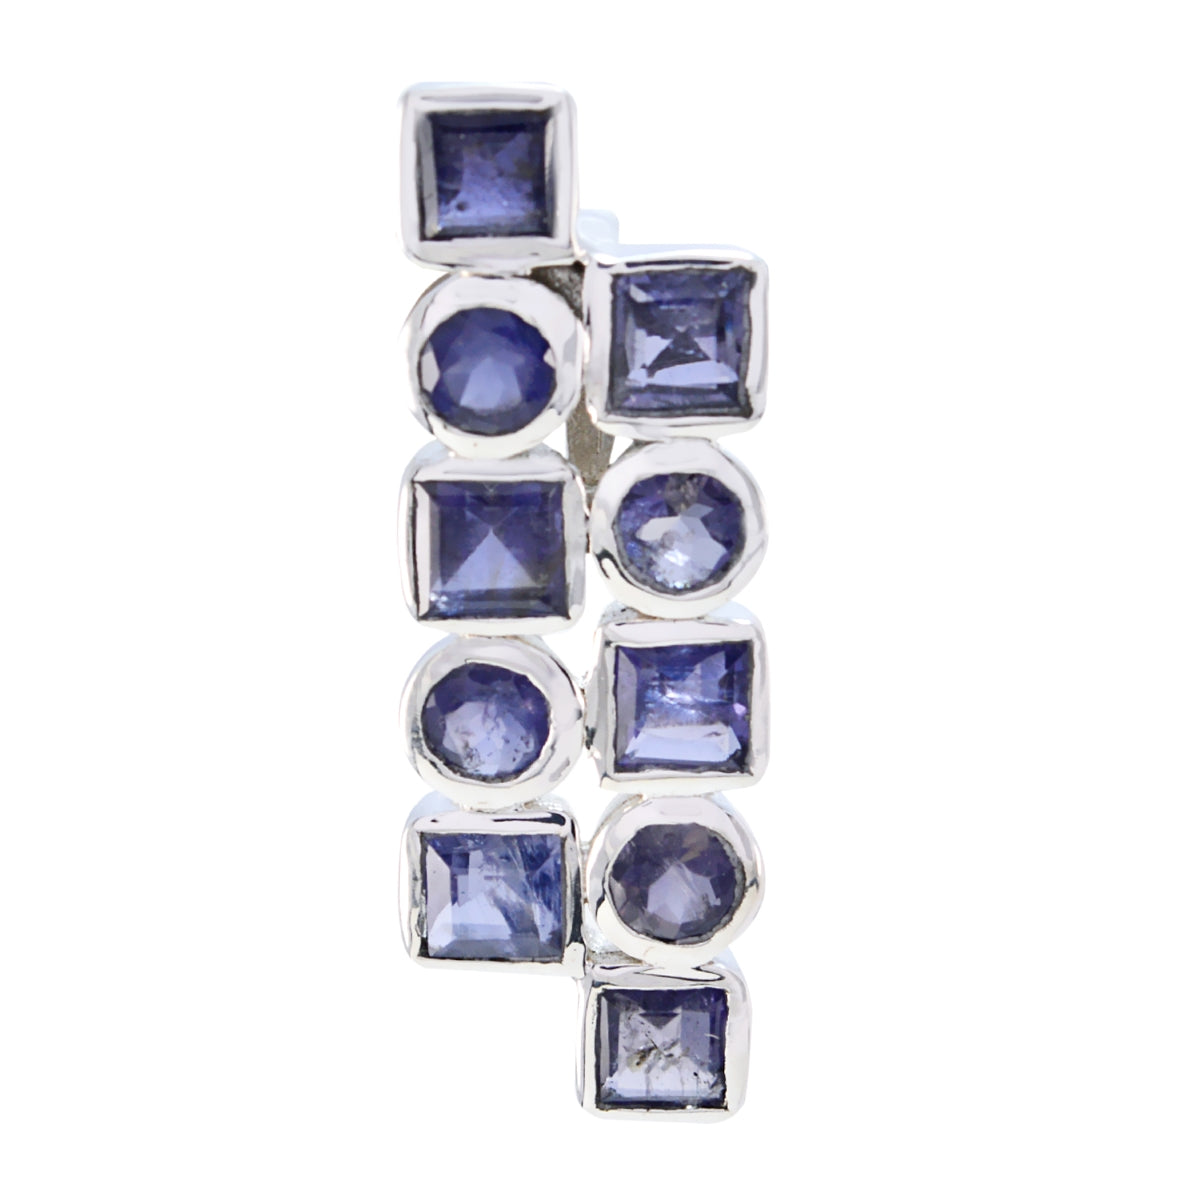 Riyo Nice Gemstone Multi Shape Faceted Nevy Blue Iolite 925 Silver Pendant gift for college